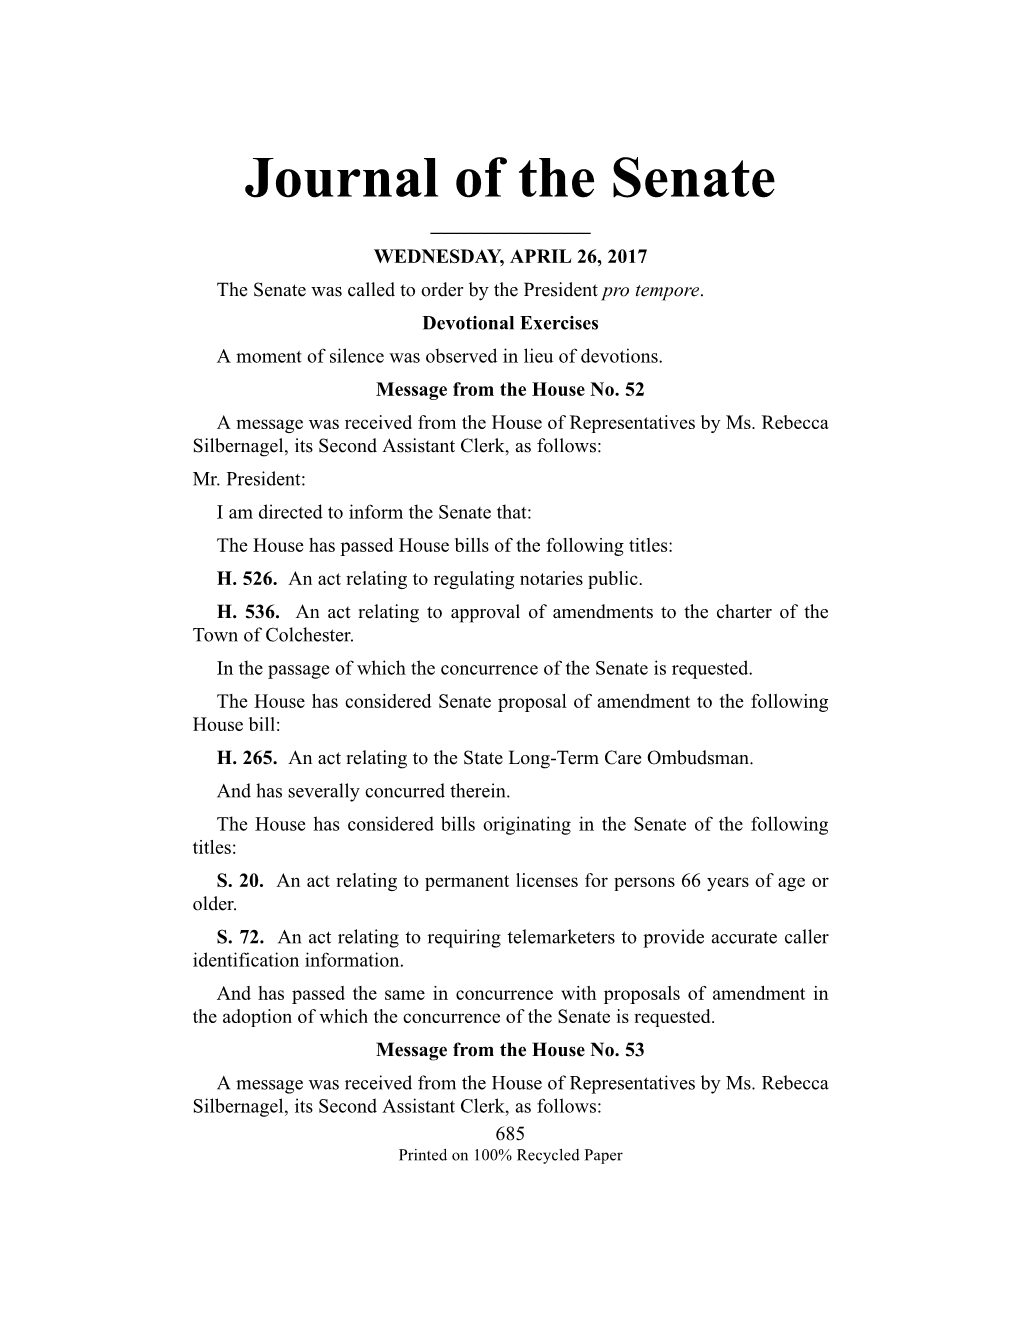 Journal of the Senate ______WEDNESDAY, APRIL 26, 2017 the Senate Was Called to Order by the President Pro Tempore